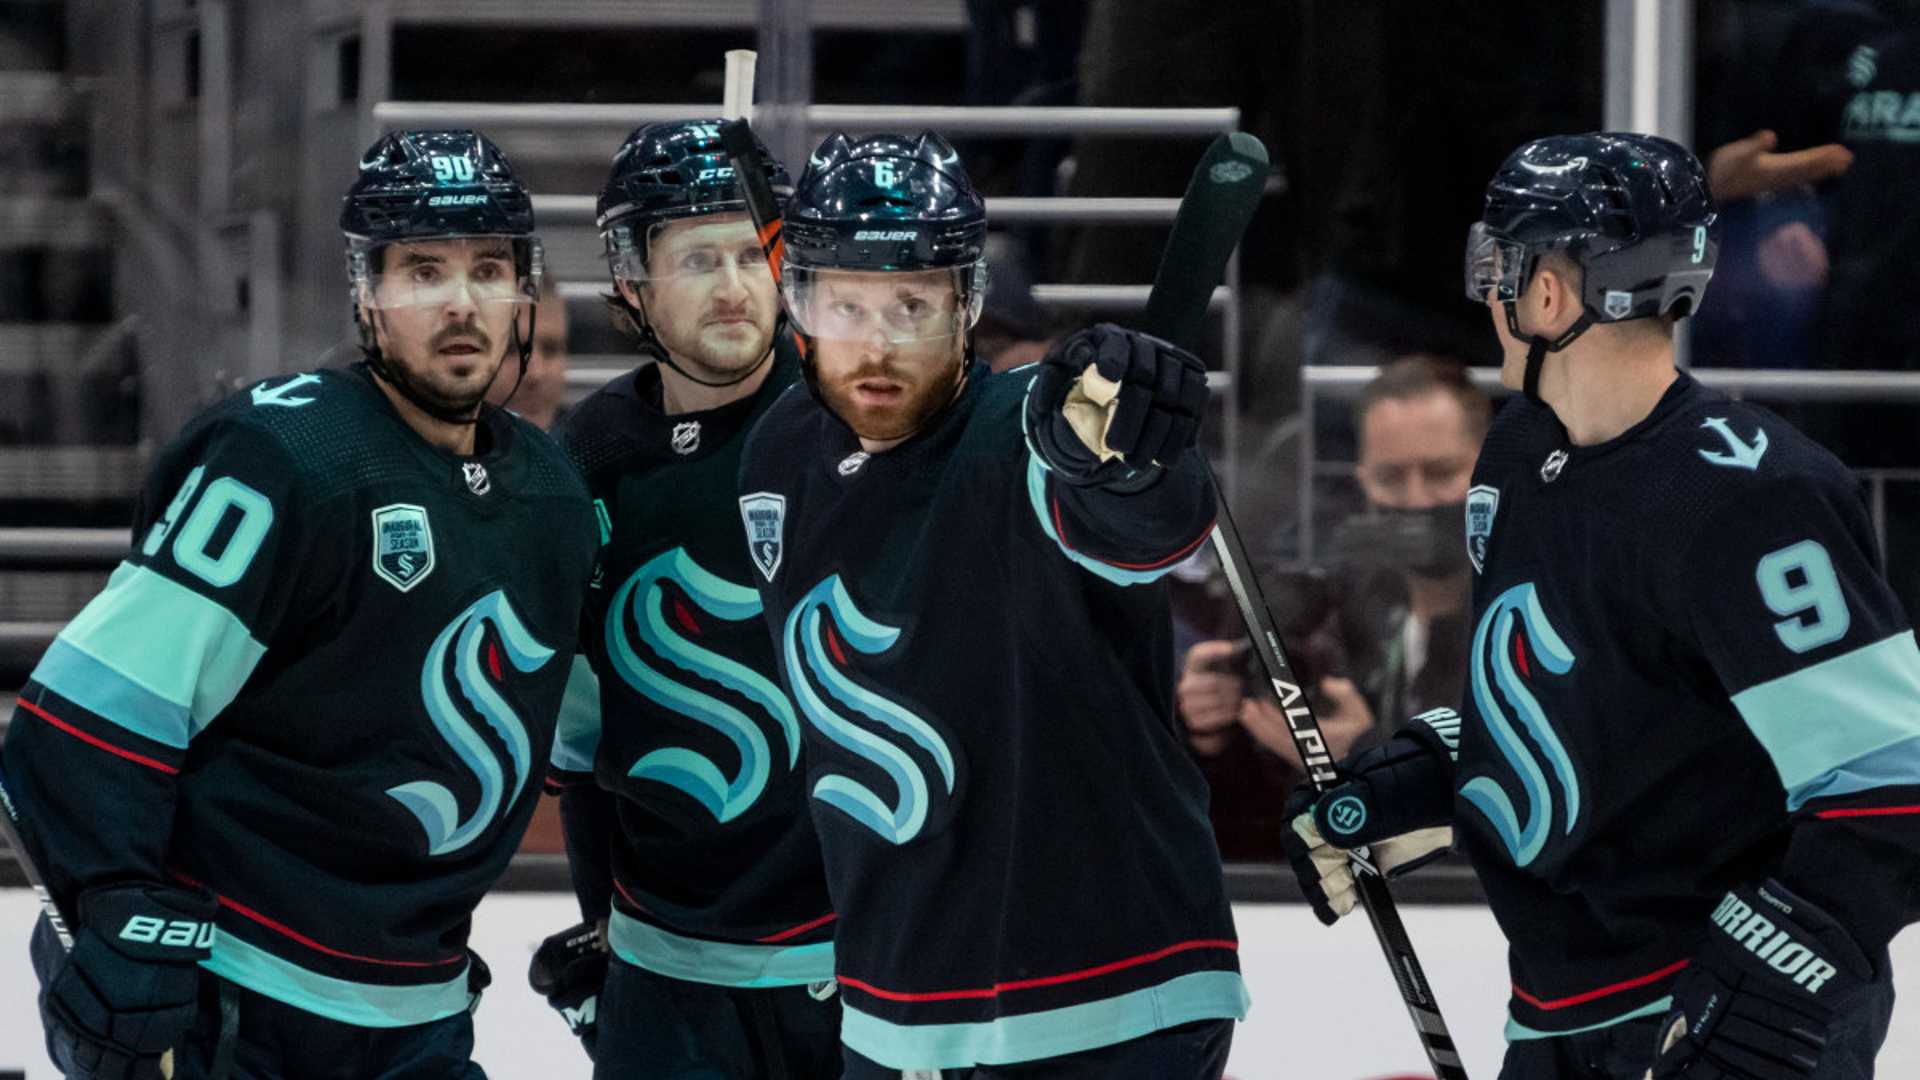 Seattle Kraken vs Colorado Avalanche: NHL Live Stream, Schedule, Probable Lineups, Injury Report